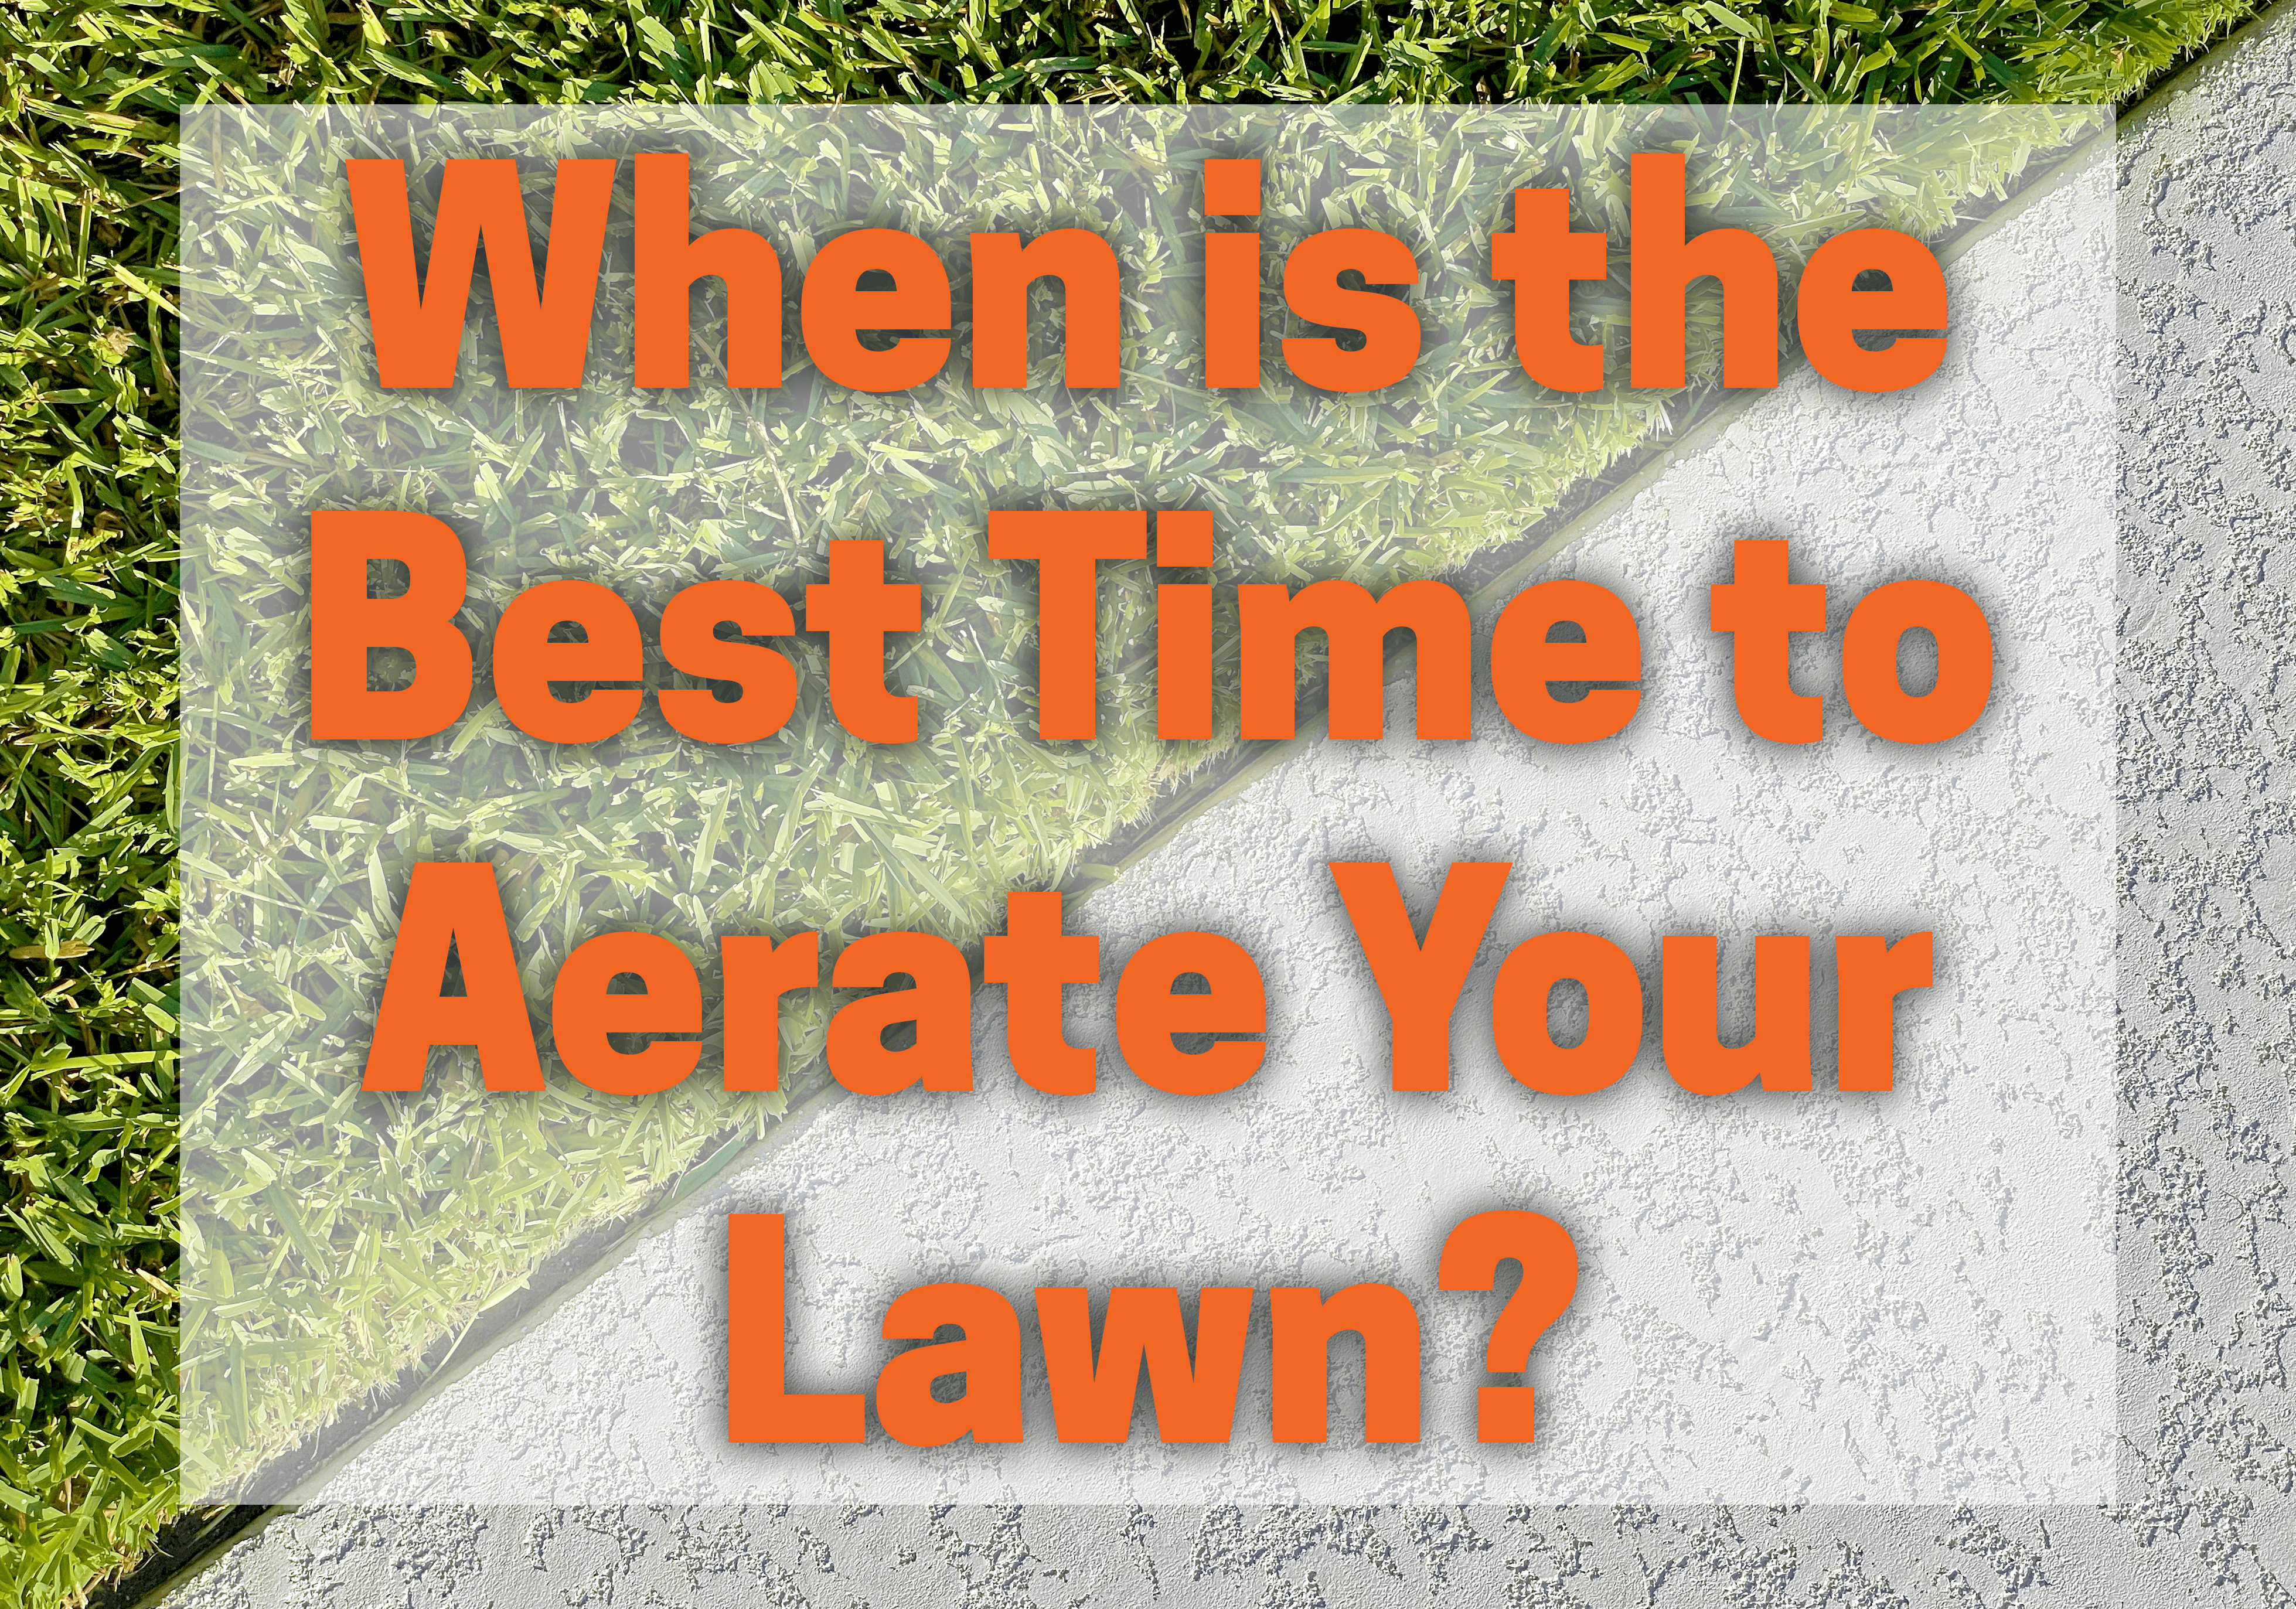 When is the best time to aerate your lawn?